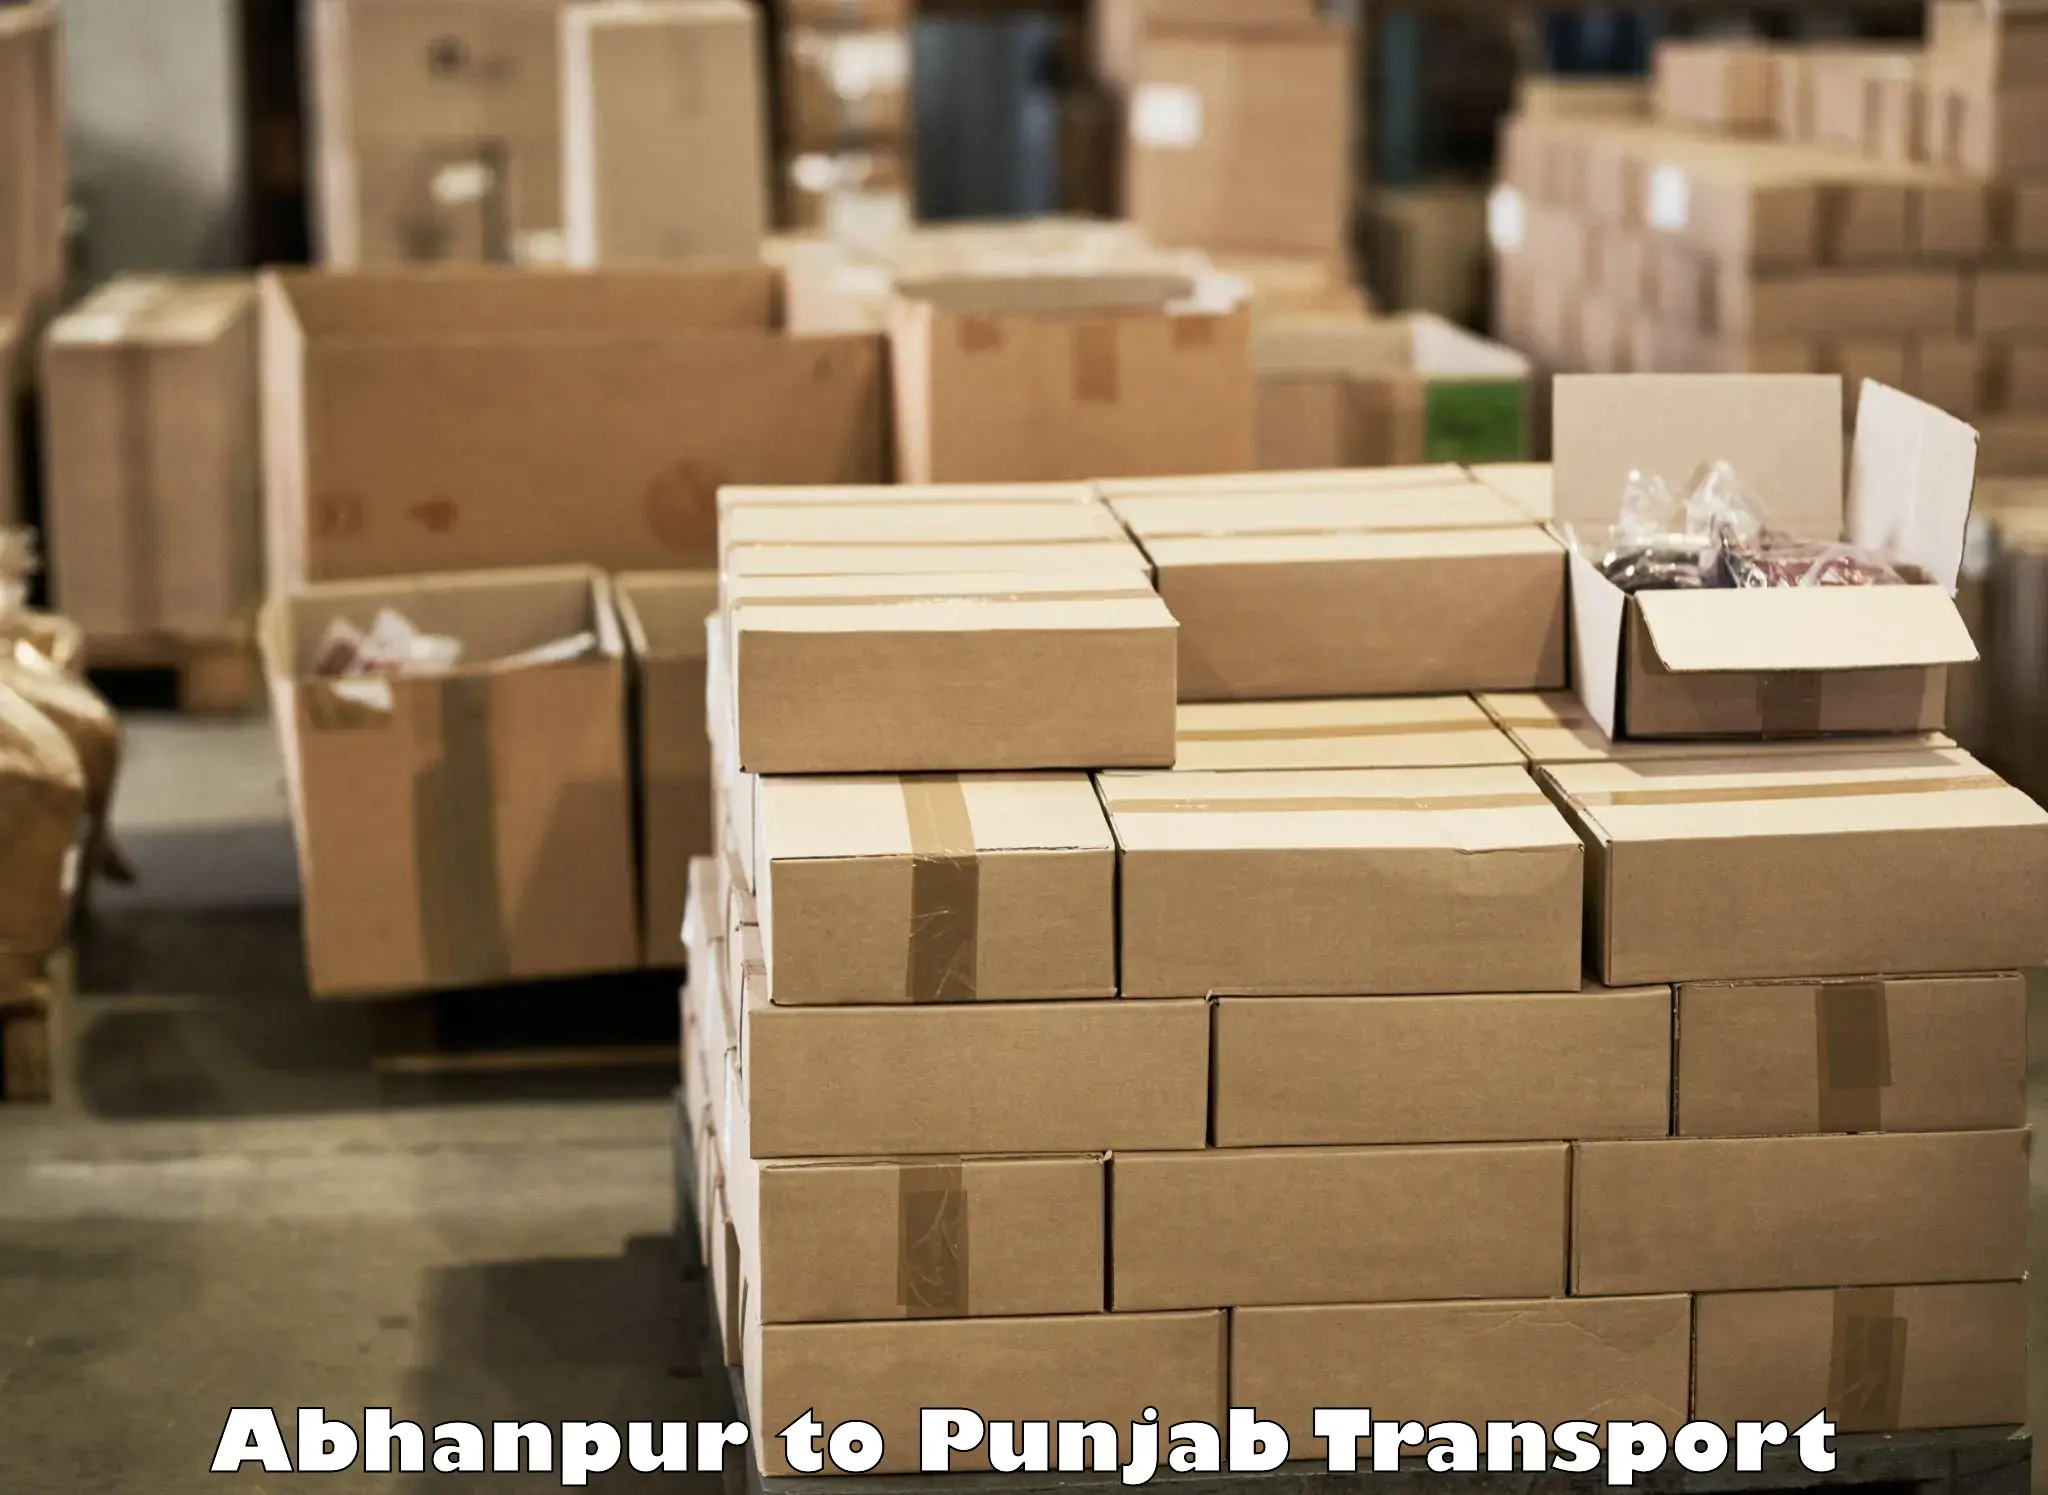 Interstate transport services Abhanpur to Pathankot